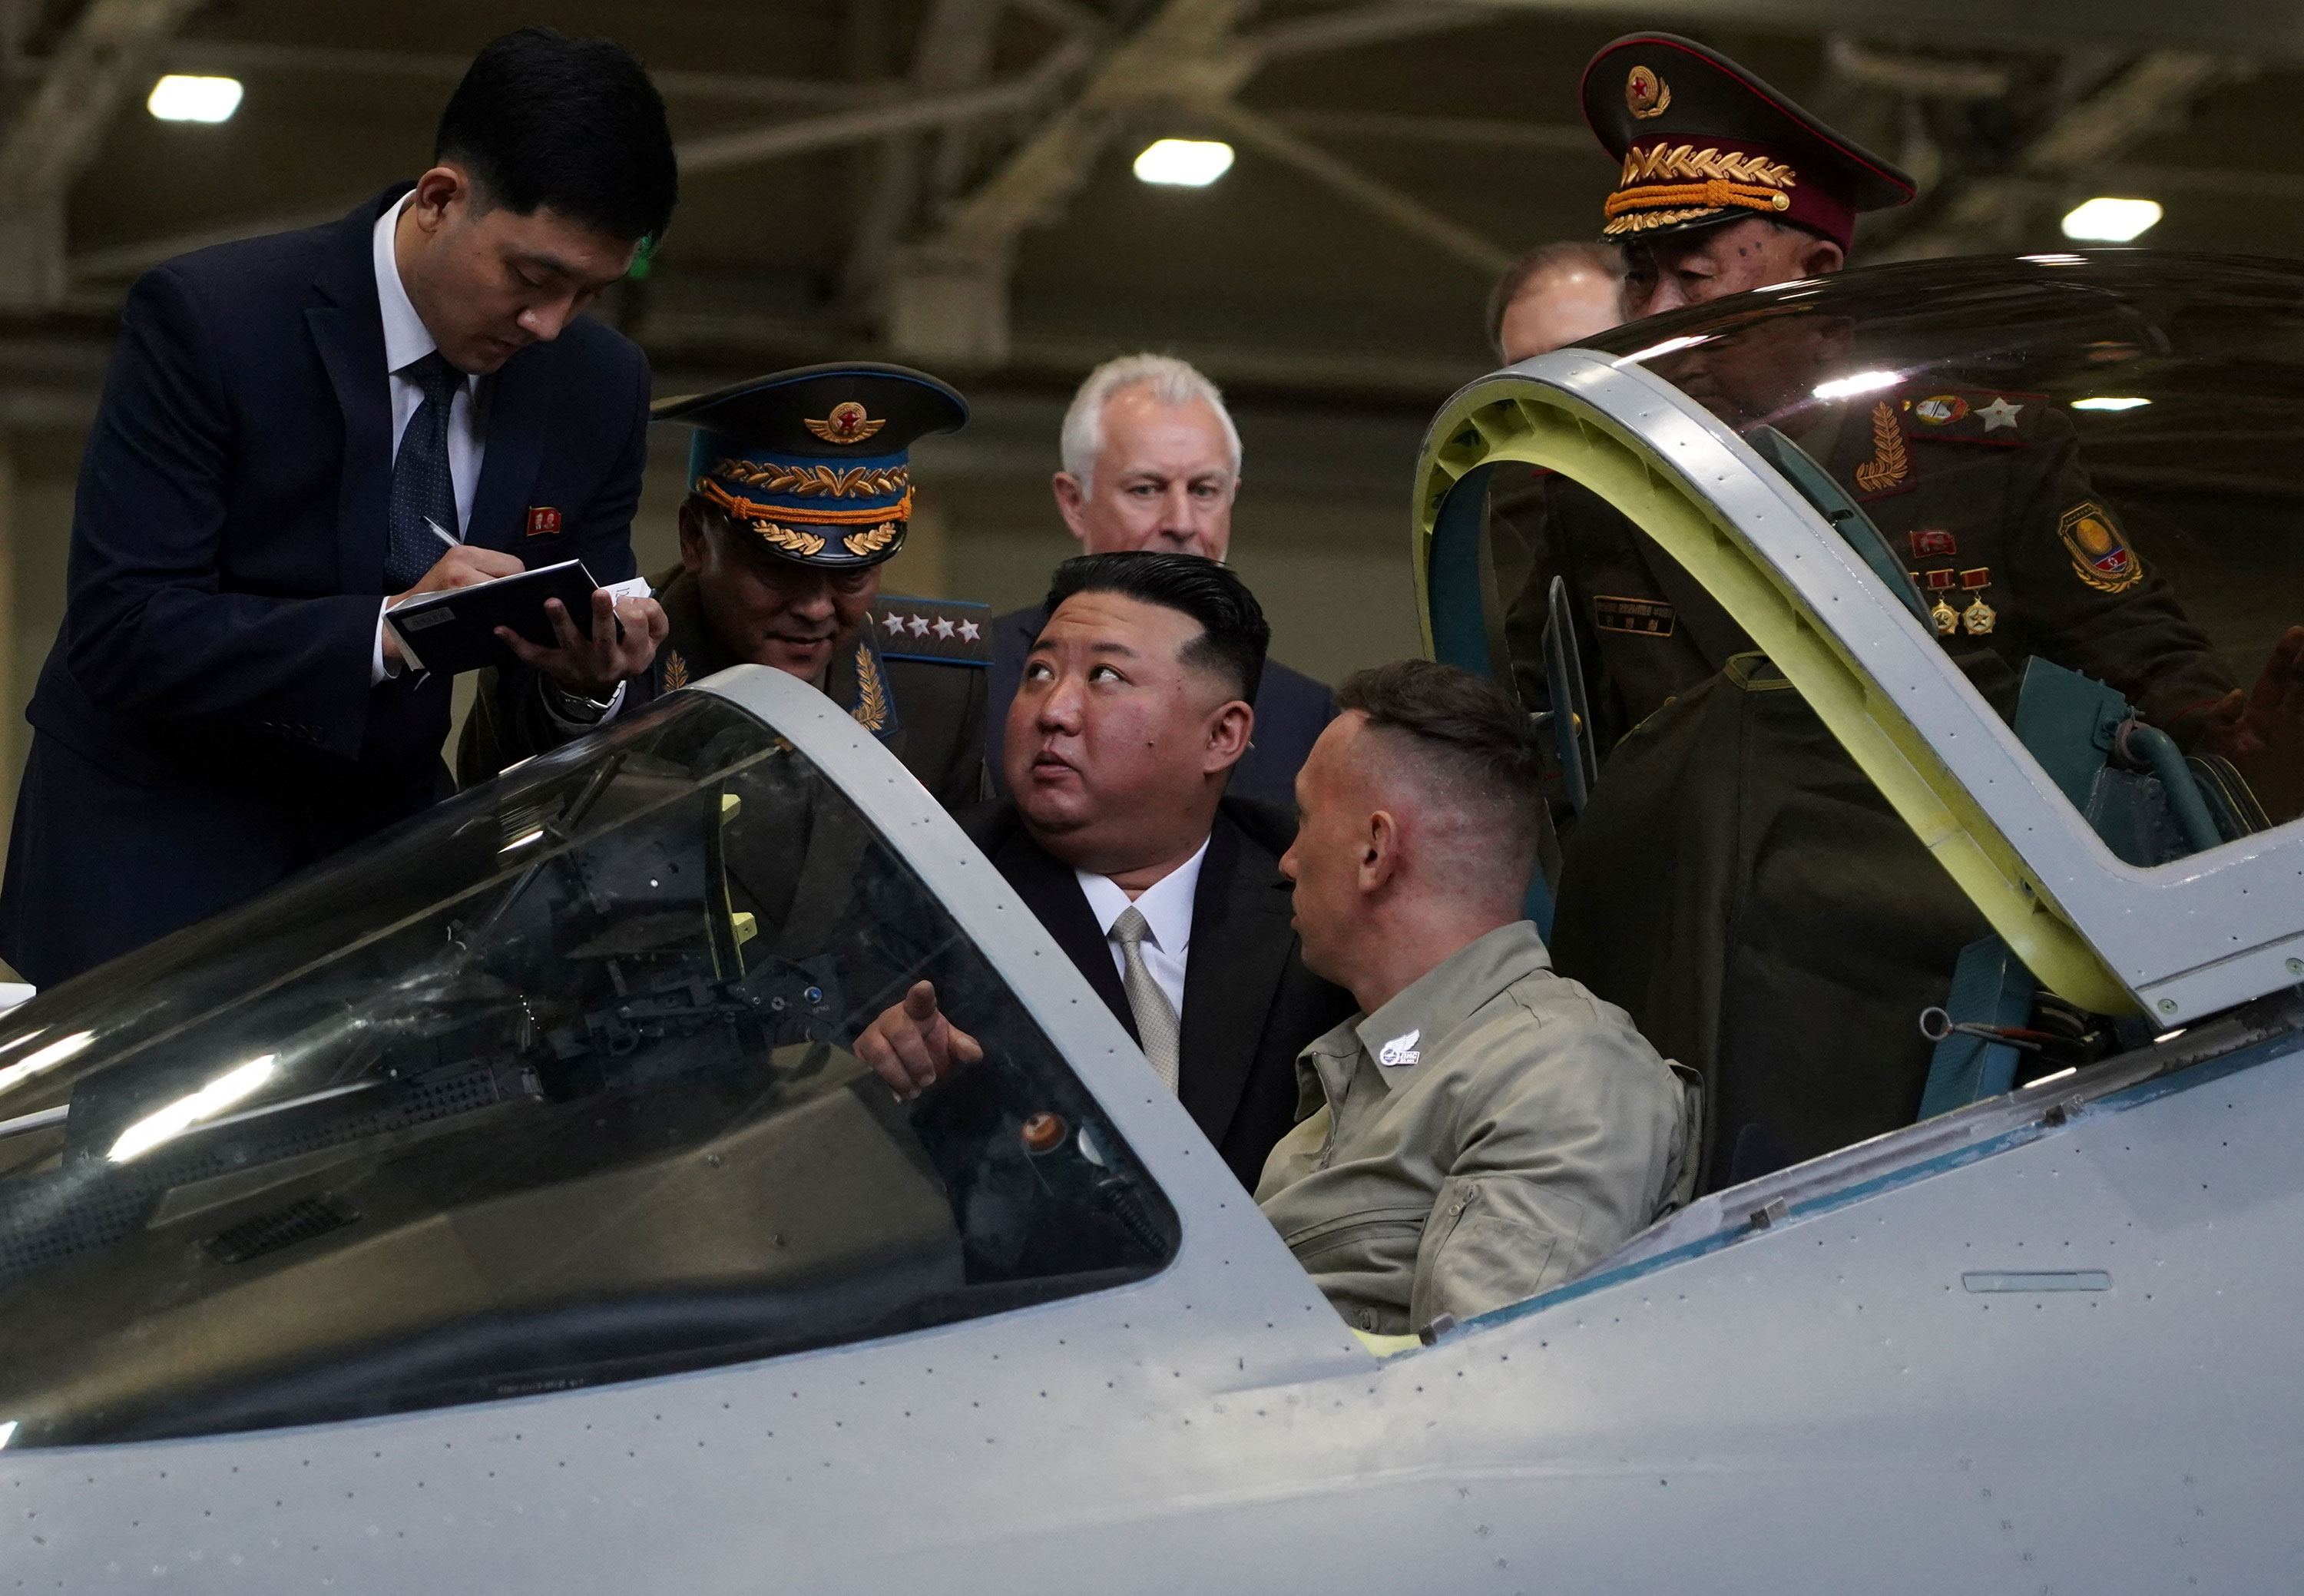 North Korean leader Kim Jong Un visits an aircraft manufacturing plant in the city of Komsomolsk-on-Amur in the Khabarovsk region, Russia, on September 15. 